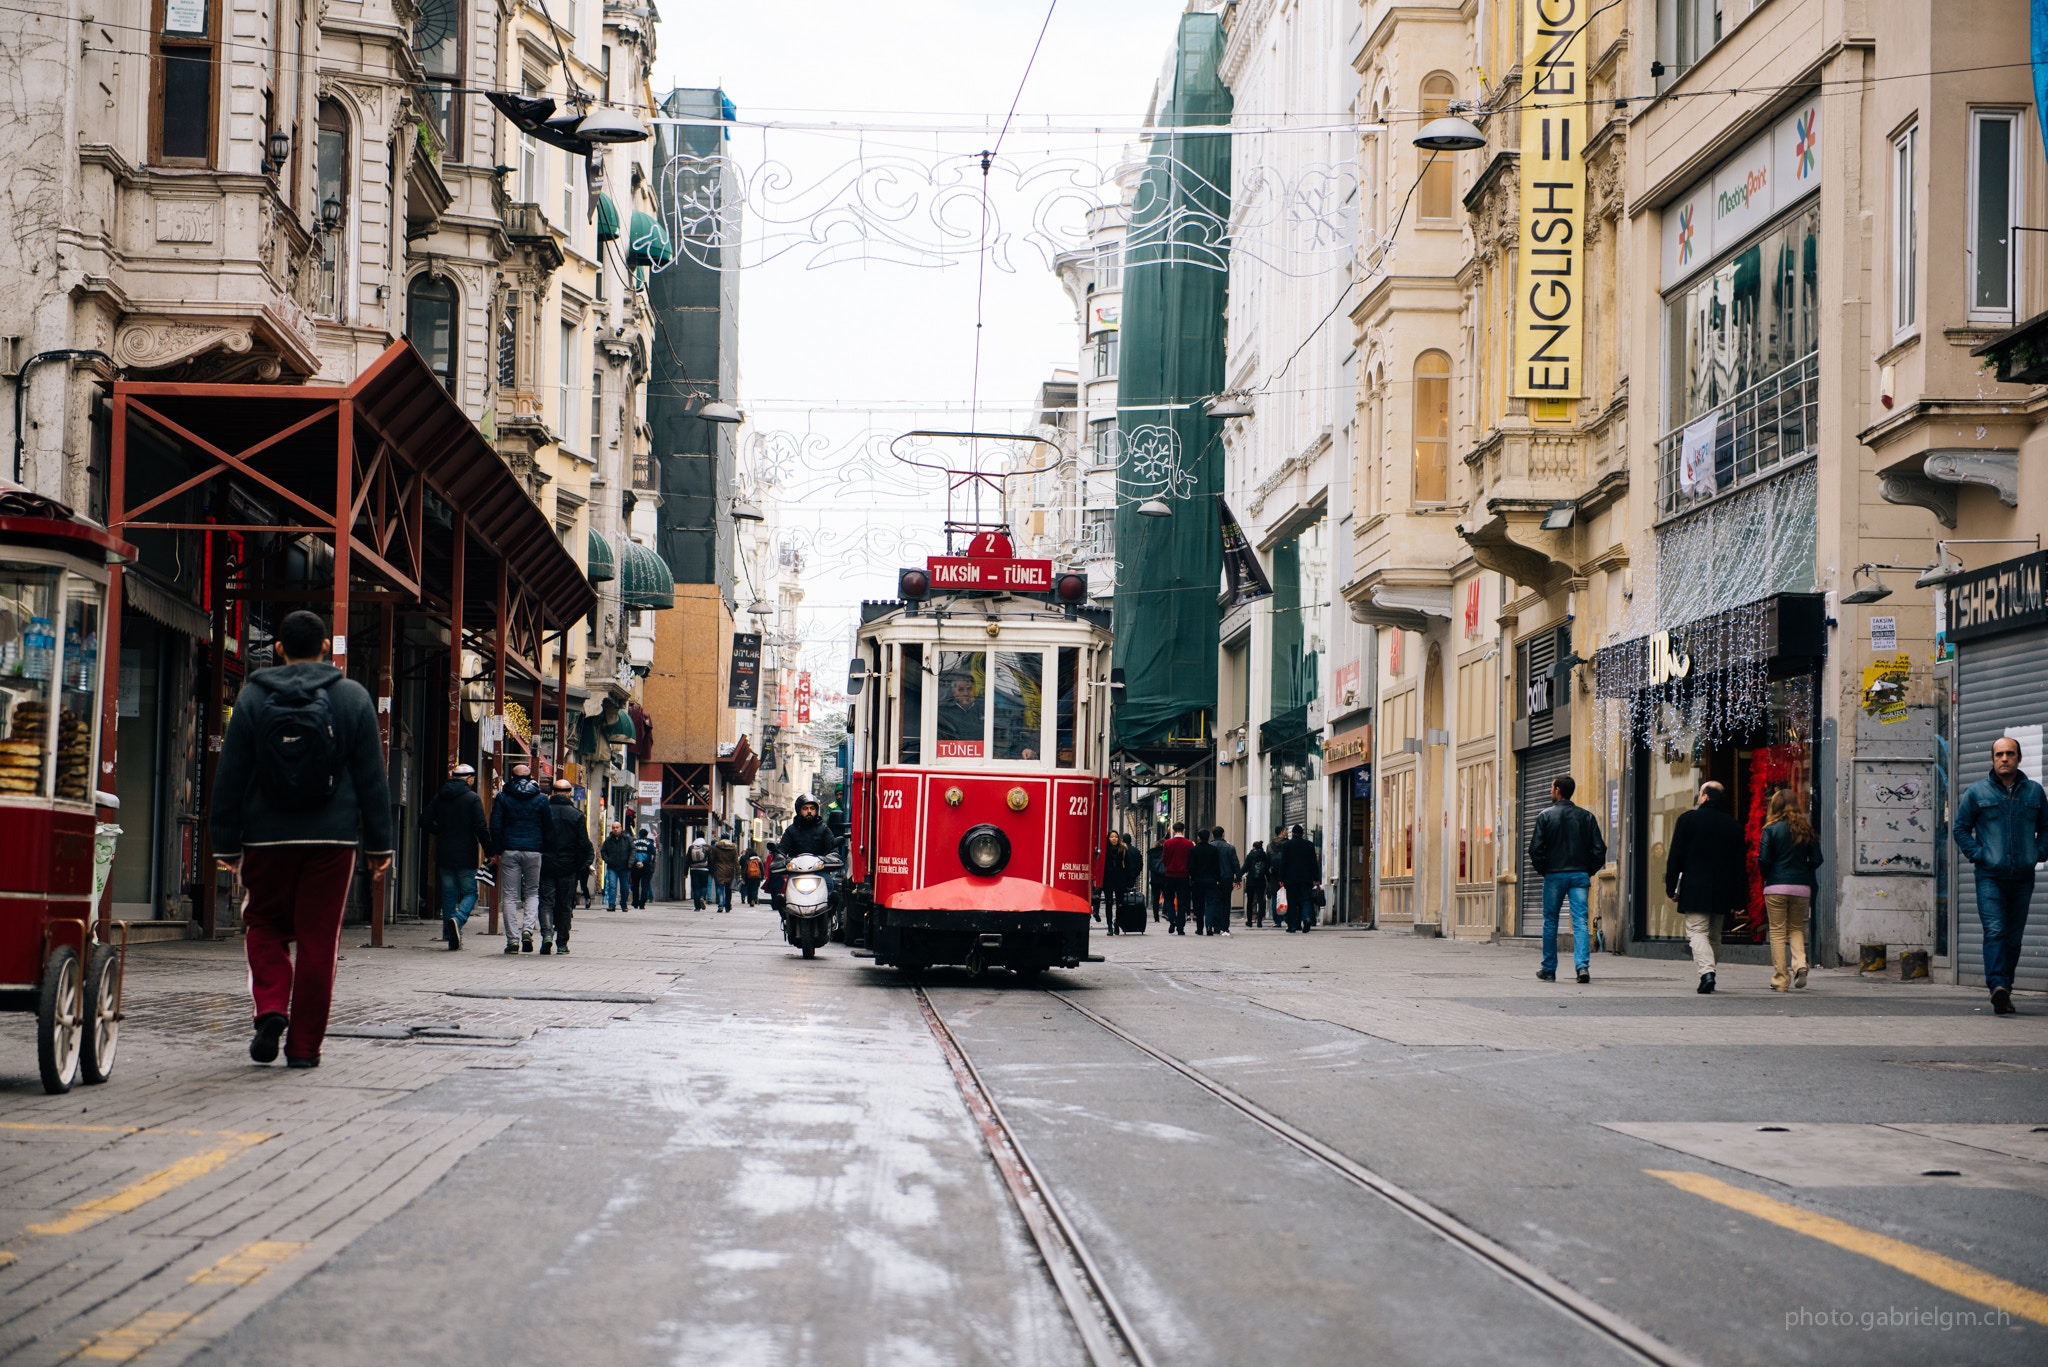 Insiders Guide To Istanbul Travel Guide 8.jpg